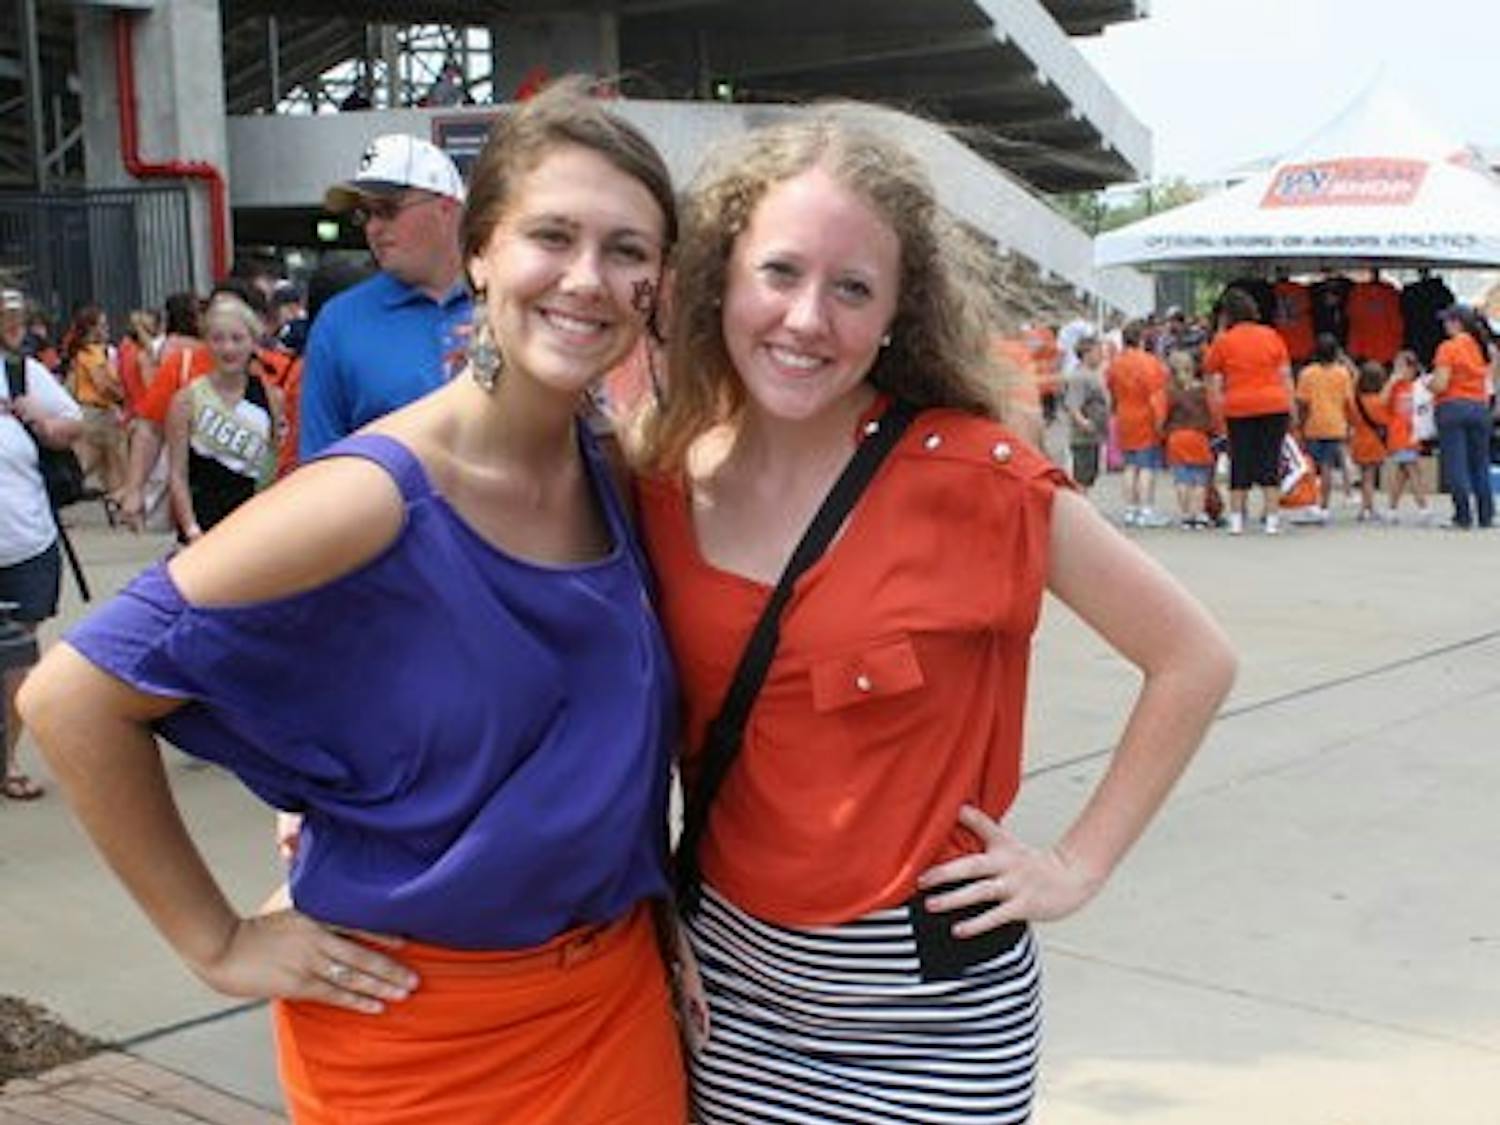 With bright tops tucked into their simple skirts, Shelby Baker and Tessa Harvill, both freshmen in pre-nursing, integrated the trend into their gameday apparel.